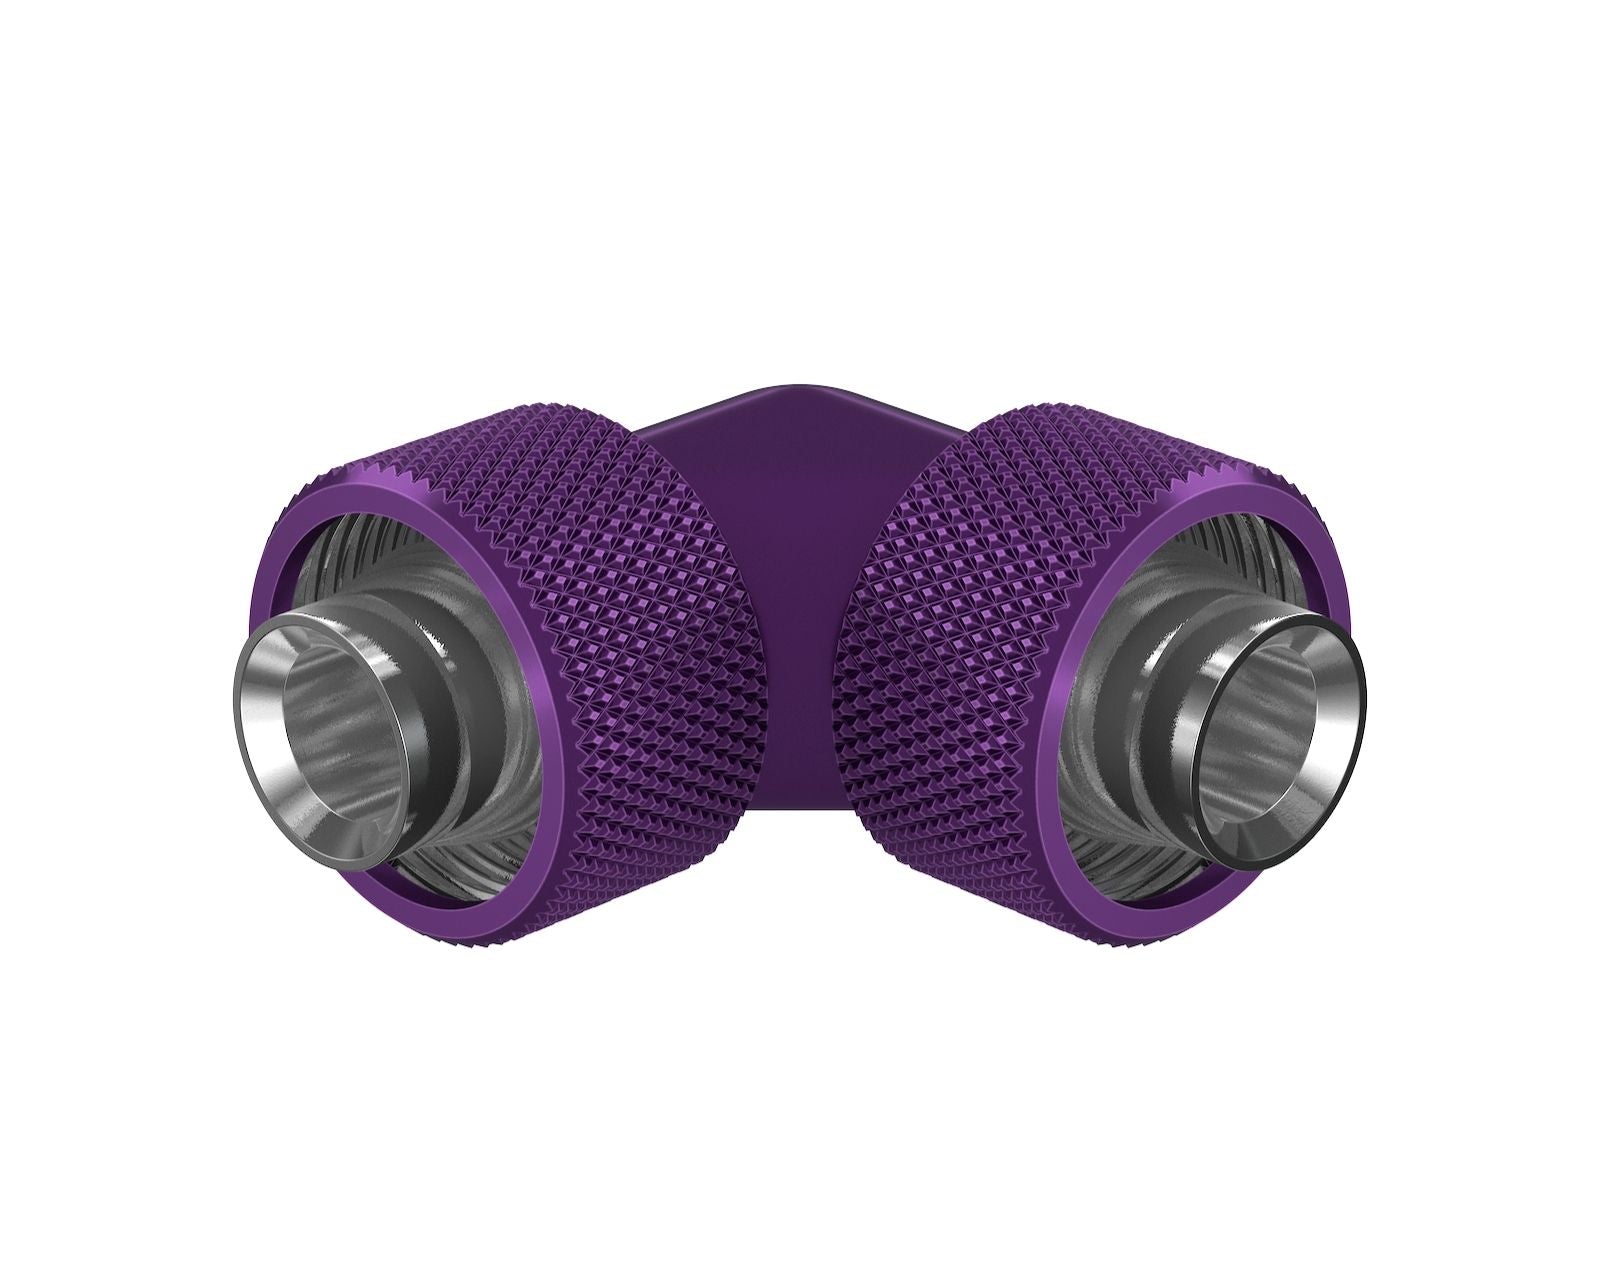 PrimoChill SecureFit SX - Premium 90 Degree Compression Fitting Set For 1/2in ID x 3/4in OD Flexible Tubing (F-SFSX3490) - Available in 20+ Colors, Custom Watercooling Loop Ready - Candy Purple